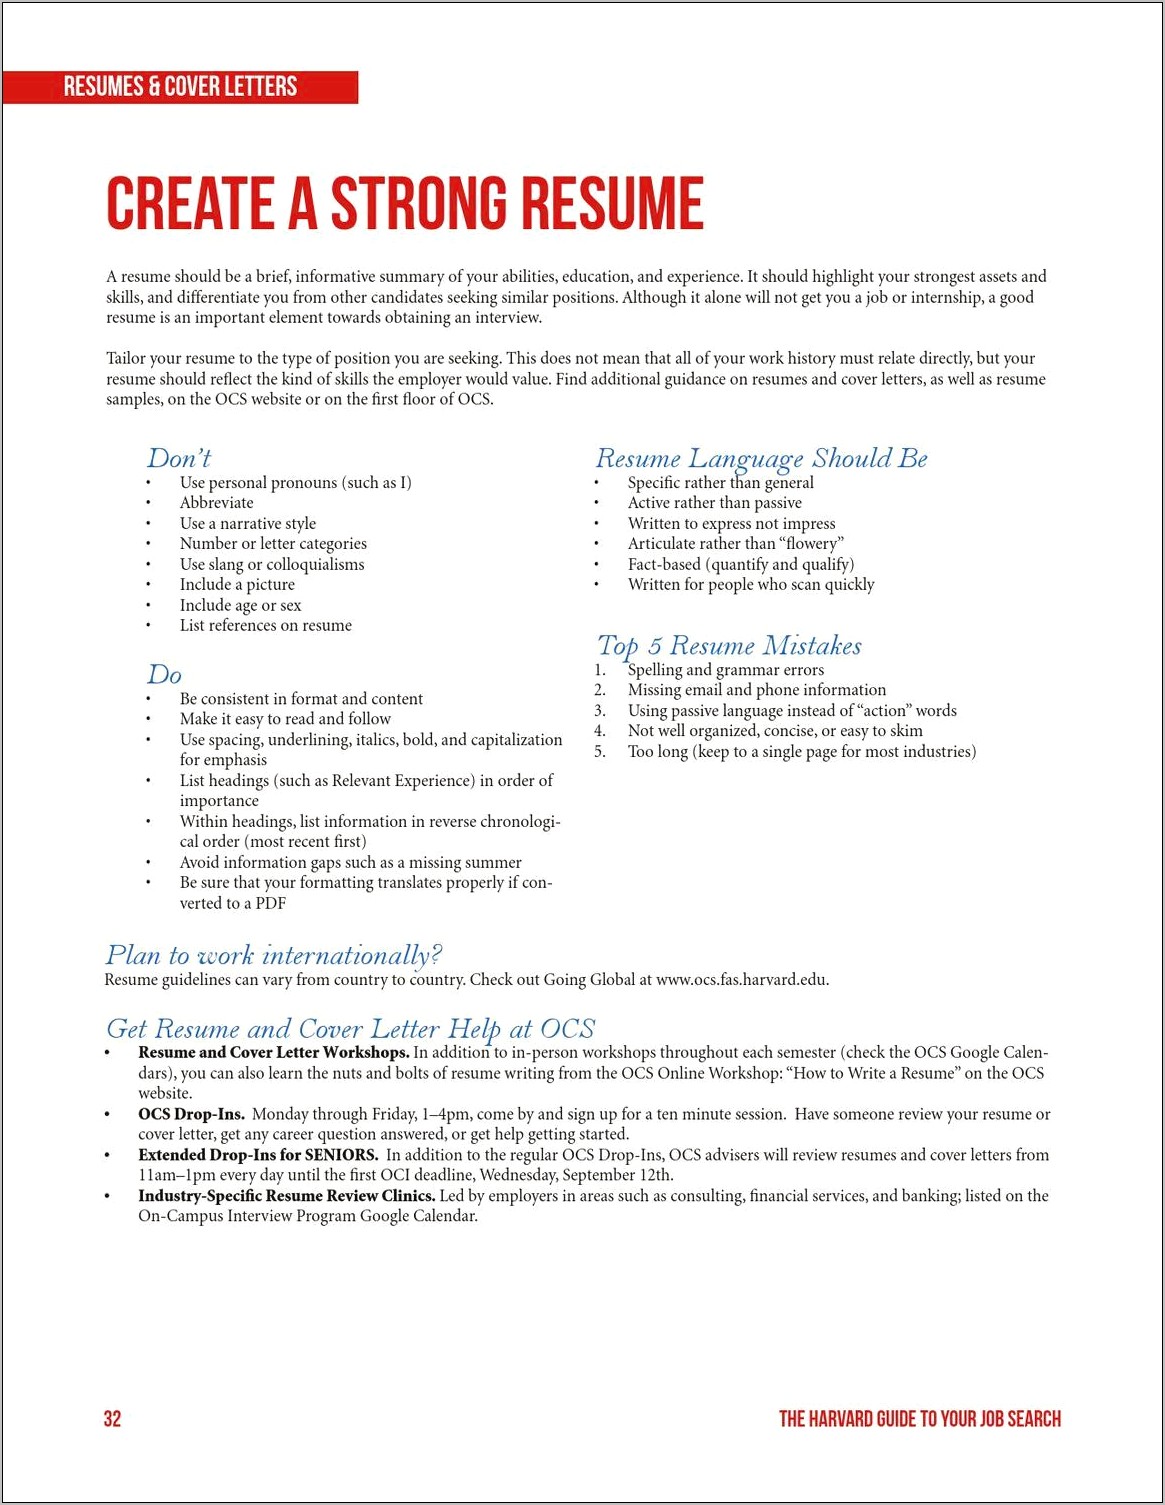 Harvard Resume Cover Letter Examples